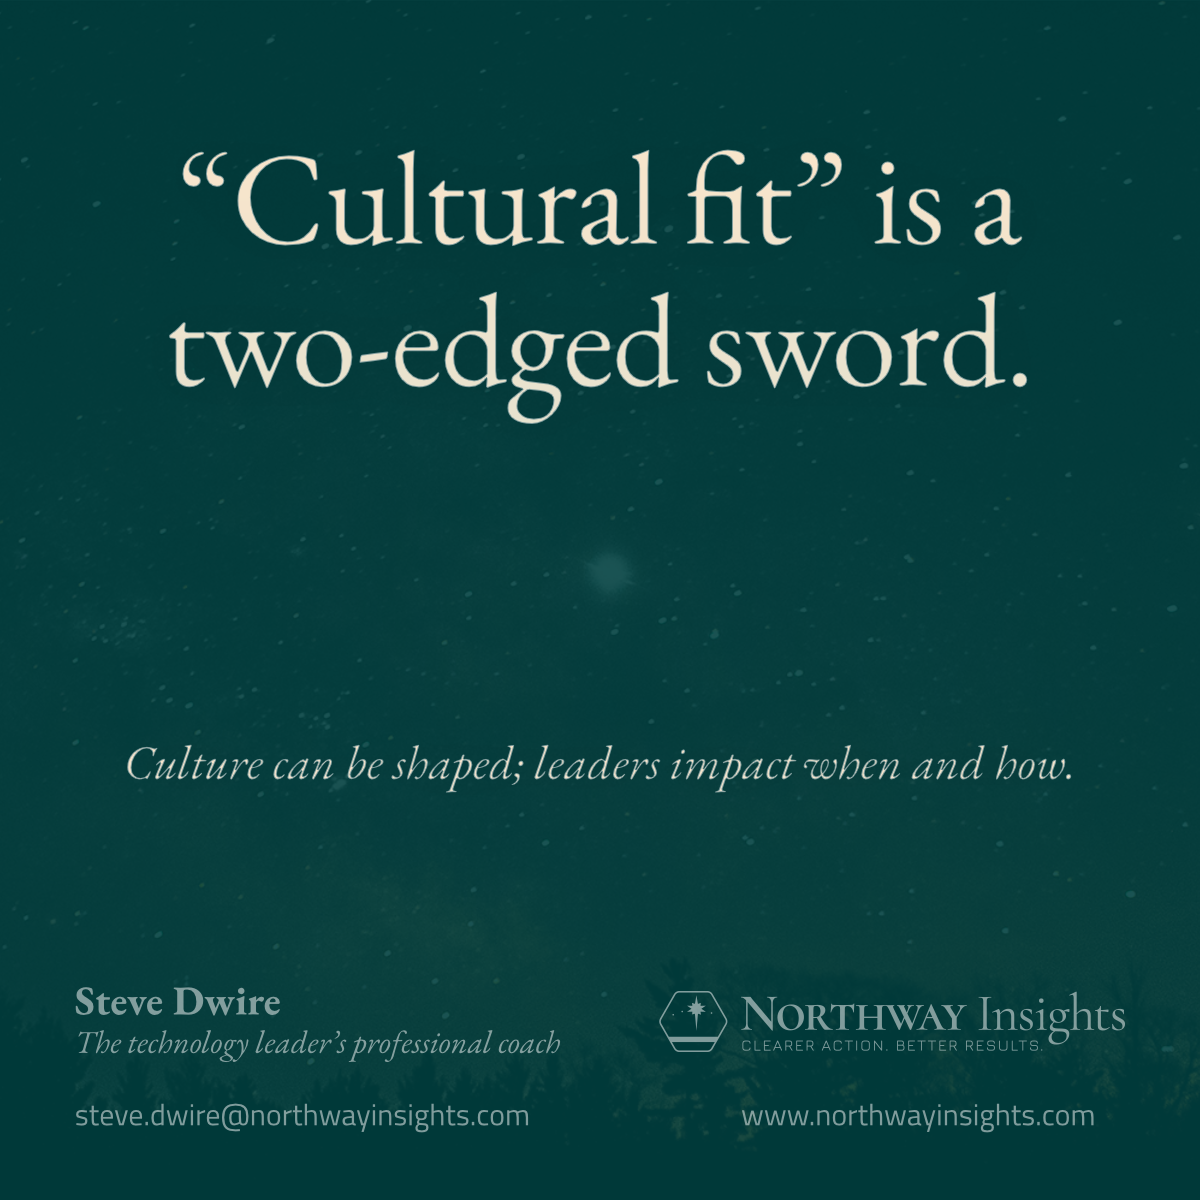 "Cultural fit" is a two-edged sword. (Culture can be shaped; leaders impact when and how.)